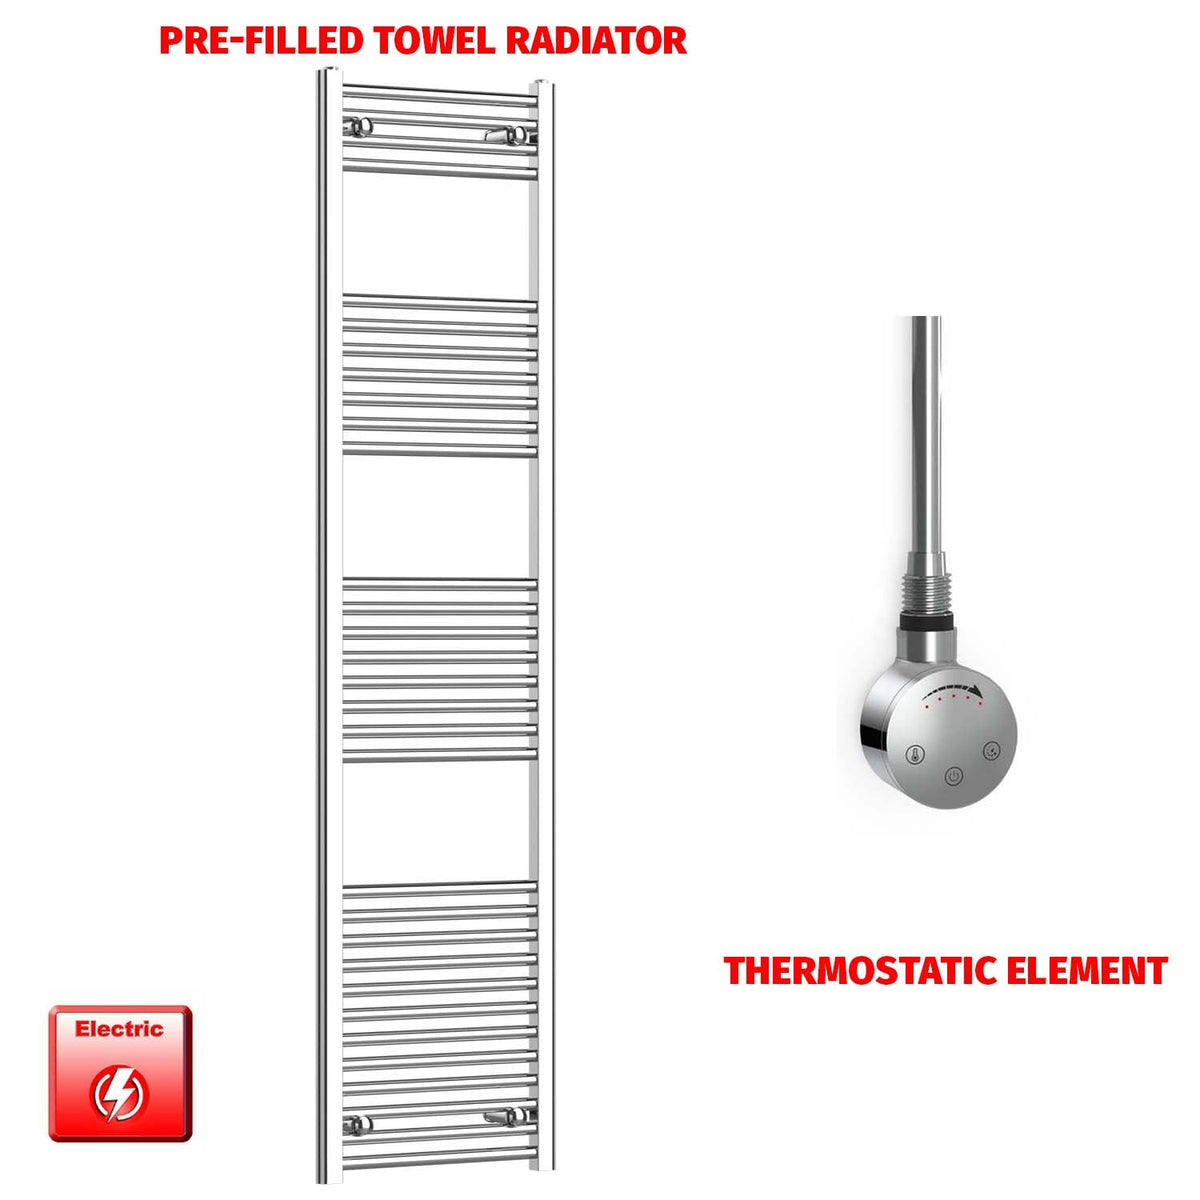 1800mm High 400mm Wide Chrome Electric Heated Towel Radiator Pre-Filled